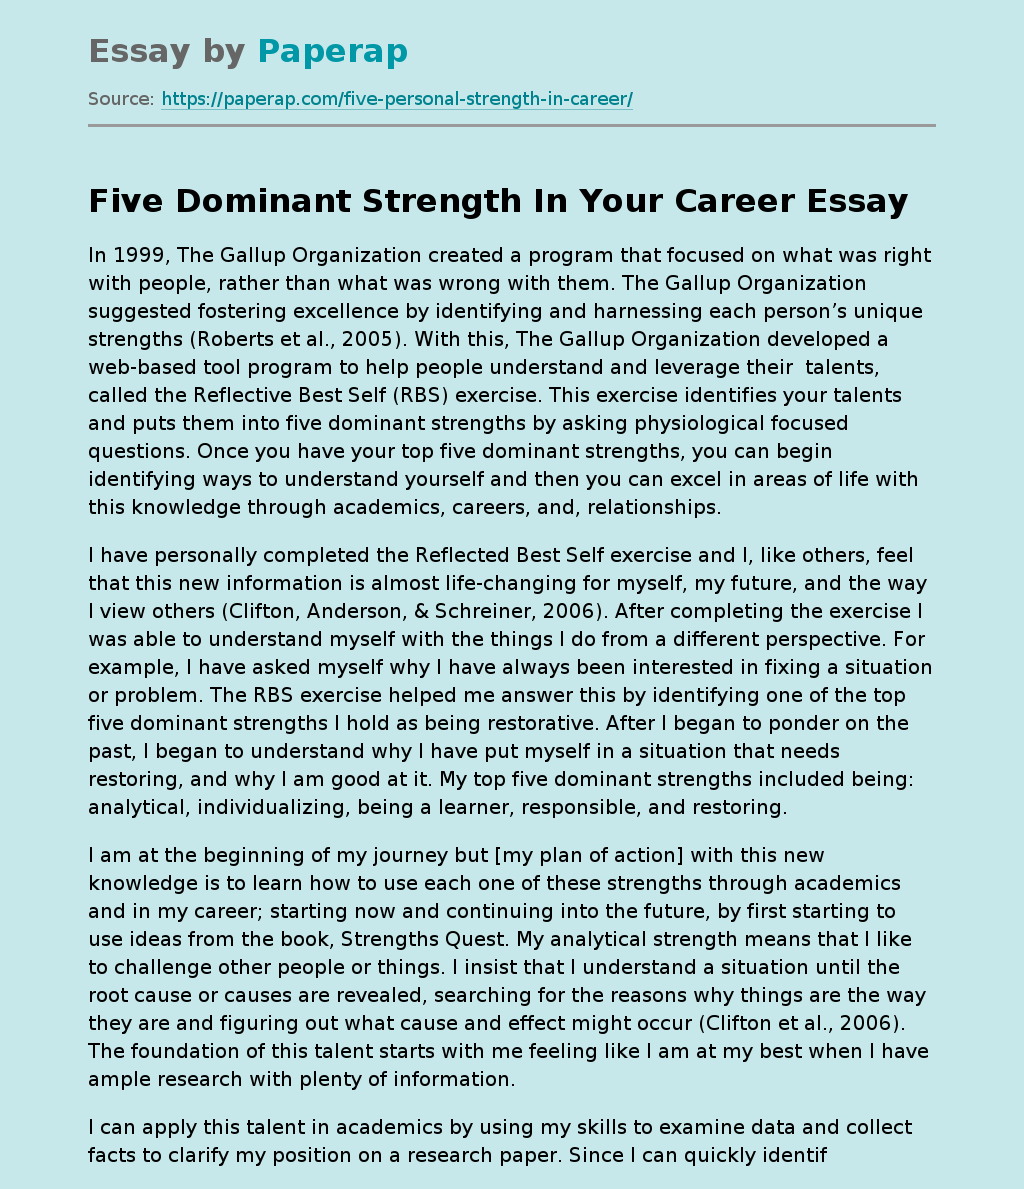 Five Dominant Strength In Your Career